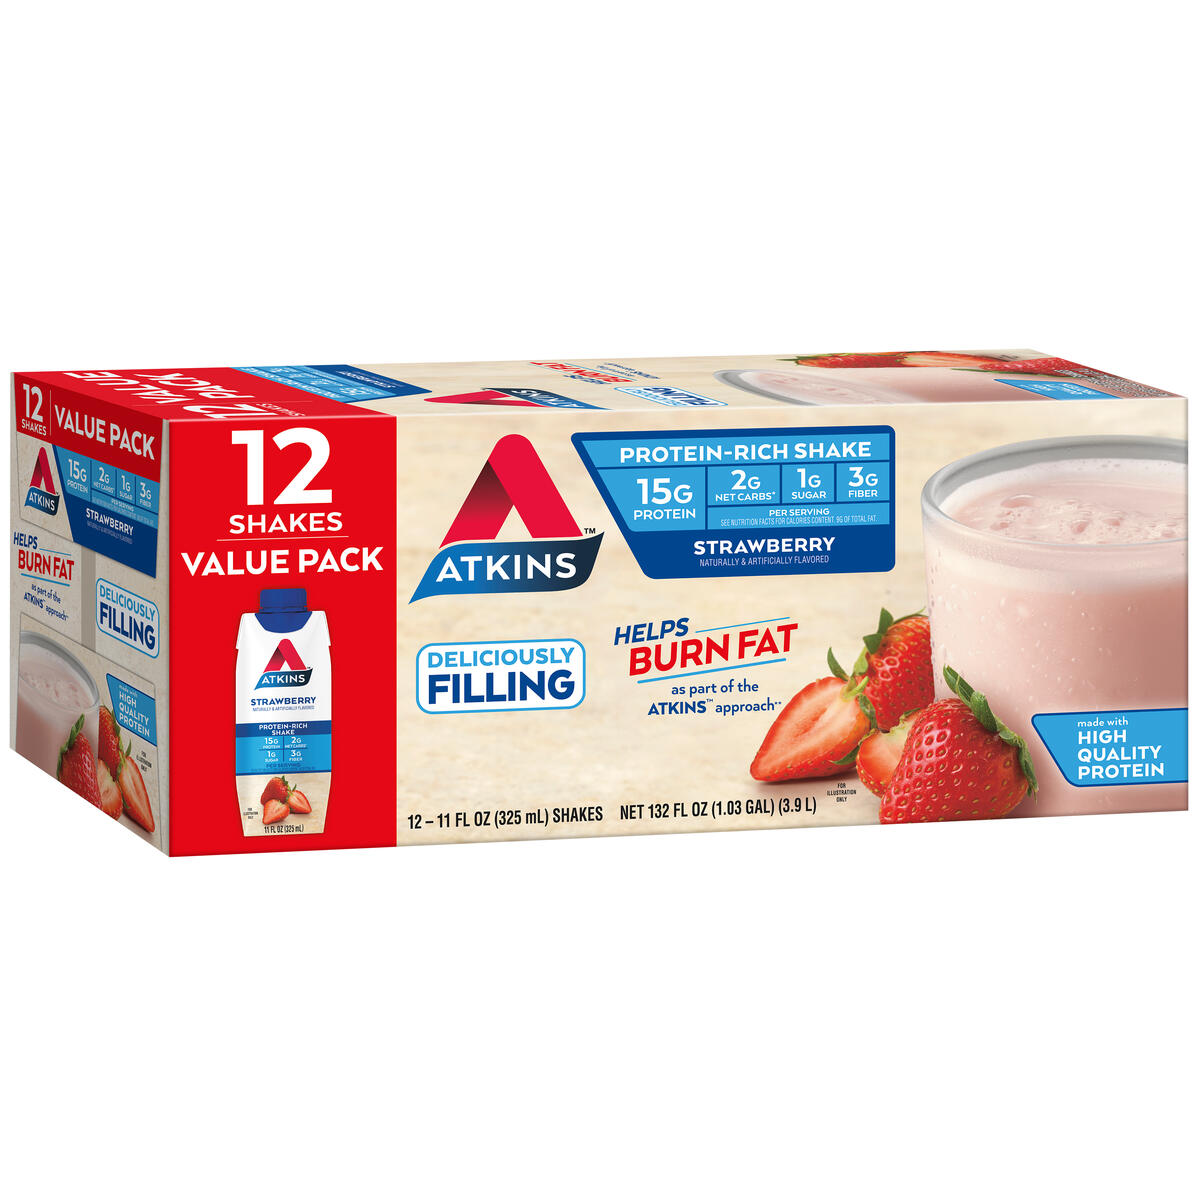 Atkins Protein Shake, Strawberry, Keto Friendly, 15g of Protein, 12 Ct (Ready to Drink) - image 2 of 9